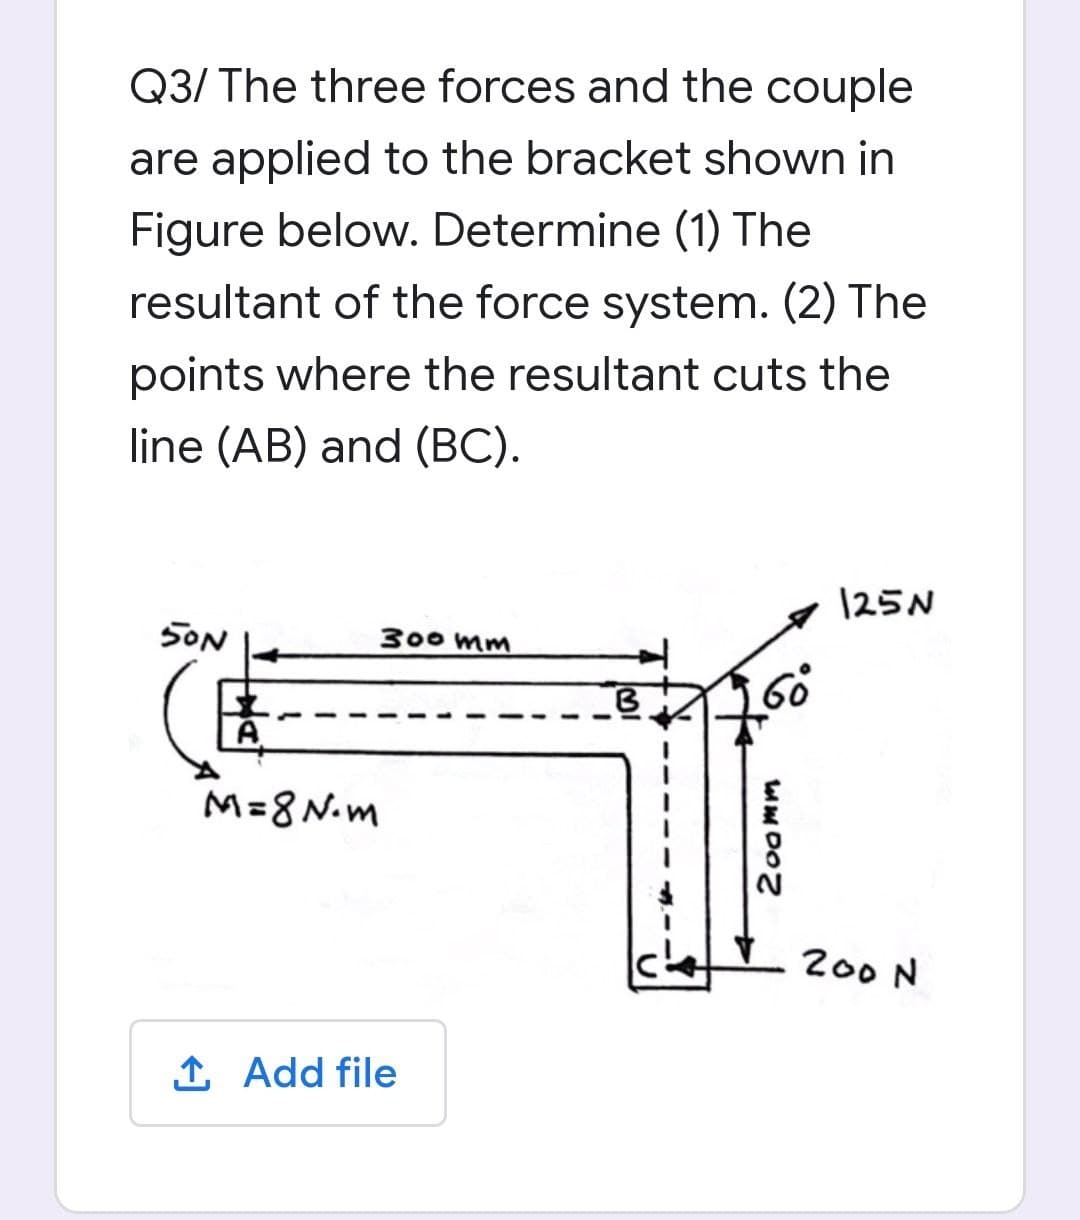 Q3/ The three forces and the couple
are applied to the bracket shown in
Figure below. Determine (1) The
resultant of the force system. (2) The
points where the resultant cuts the
line (AB) and (BC).
125N
SON
300 mm
M=8N.m
200 N
1 Add file
200mm
